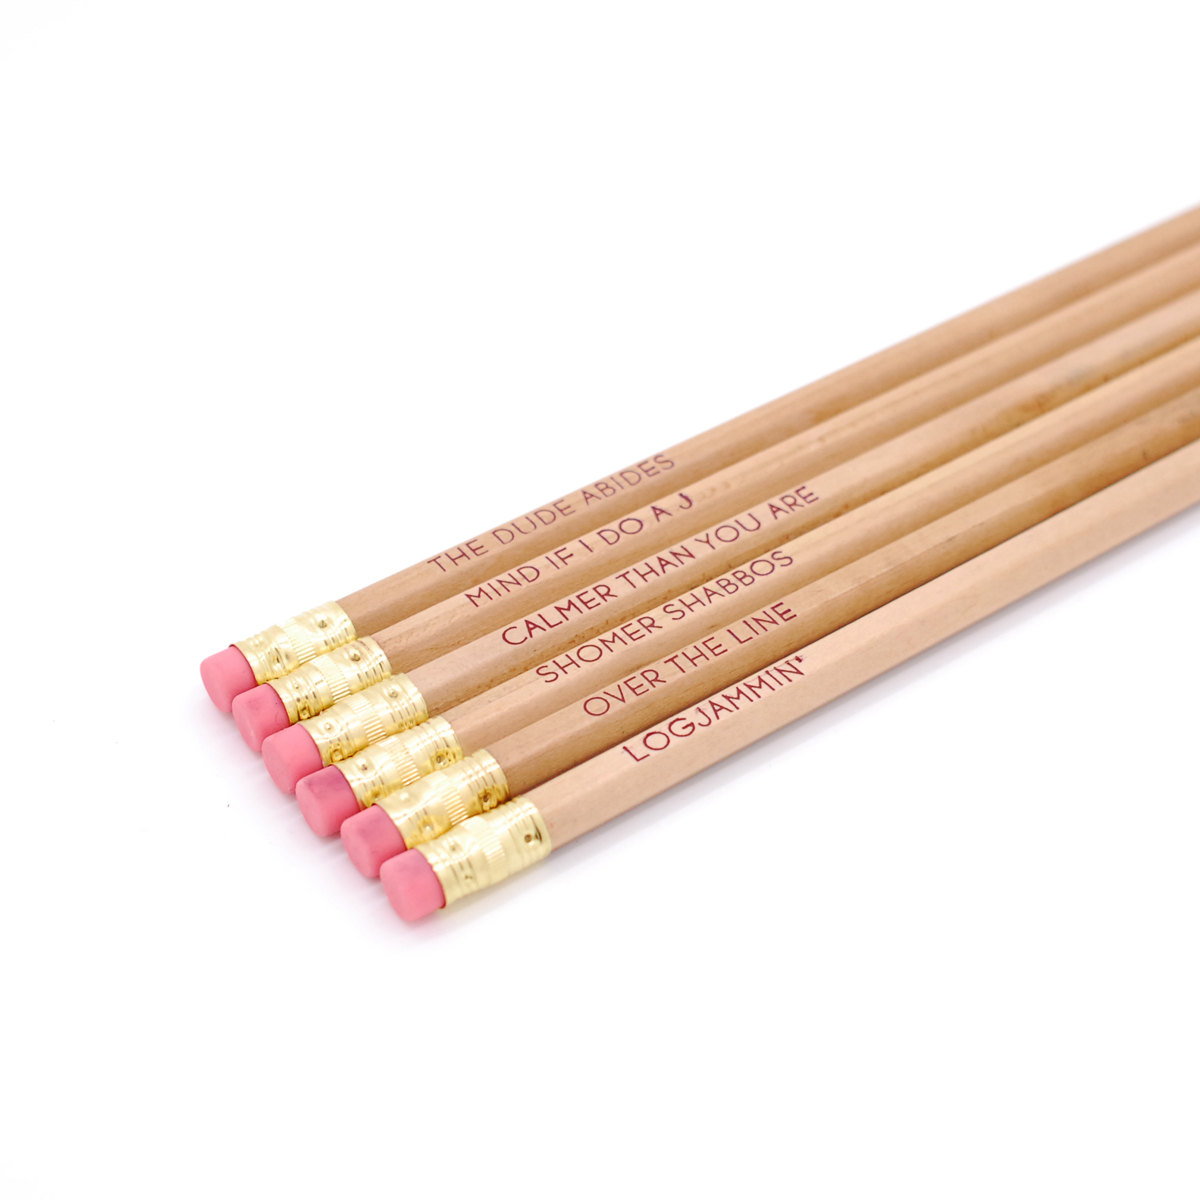 Wooden pencil with Logo